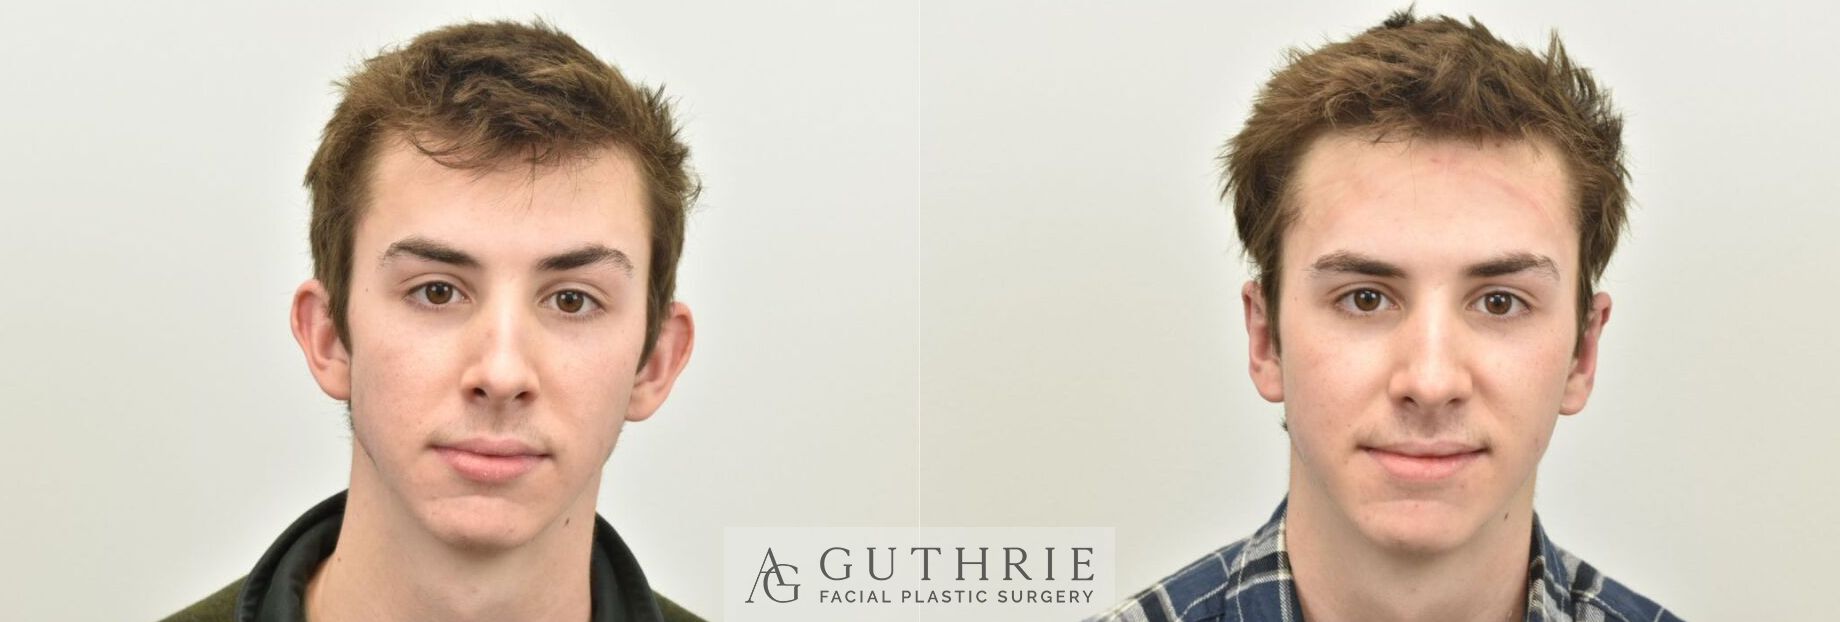 a young man before and after otoplasty surgery